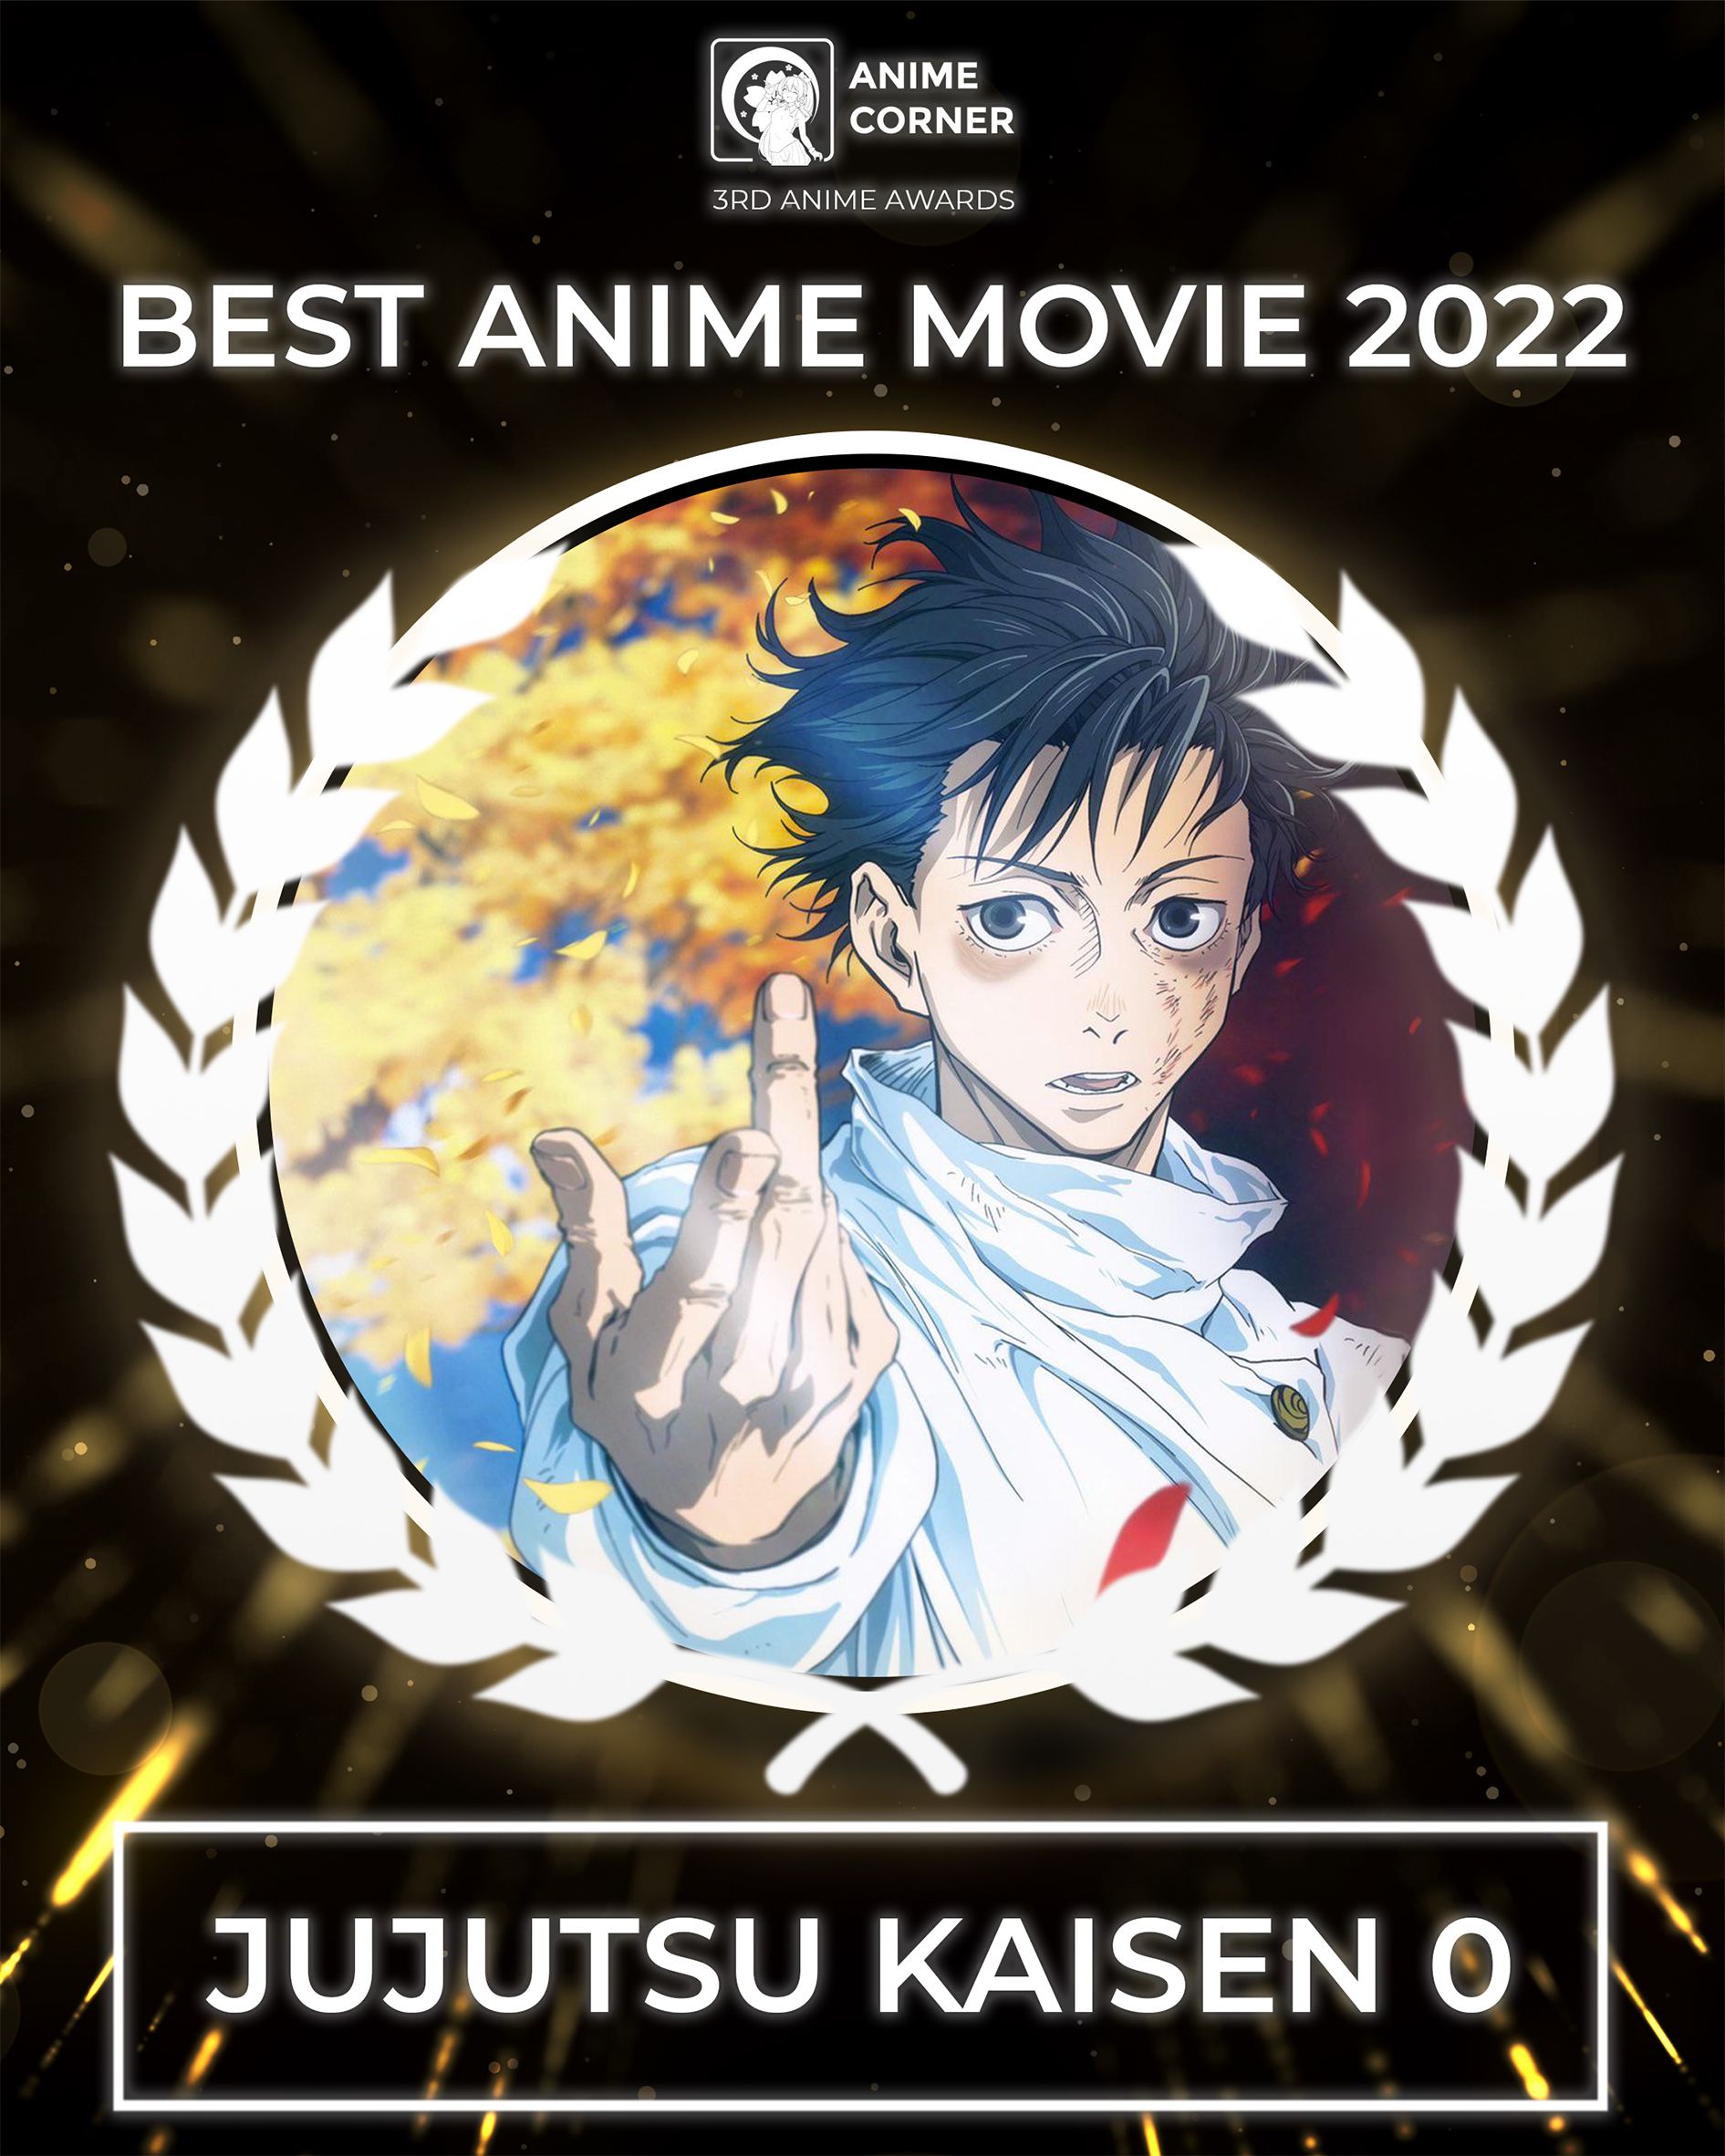 Top 100 Highest Rated Anime Series of 2022 